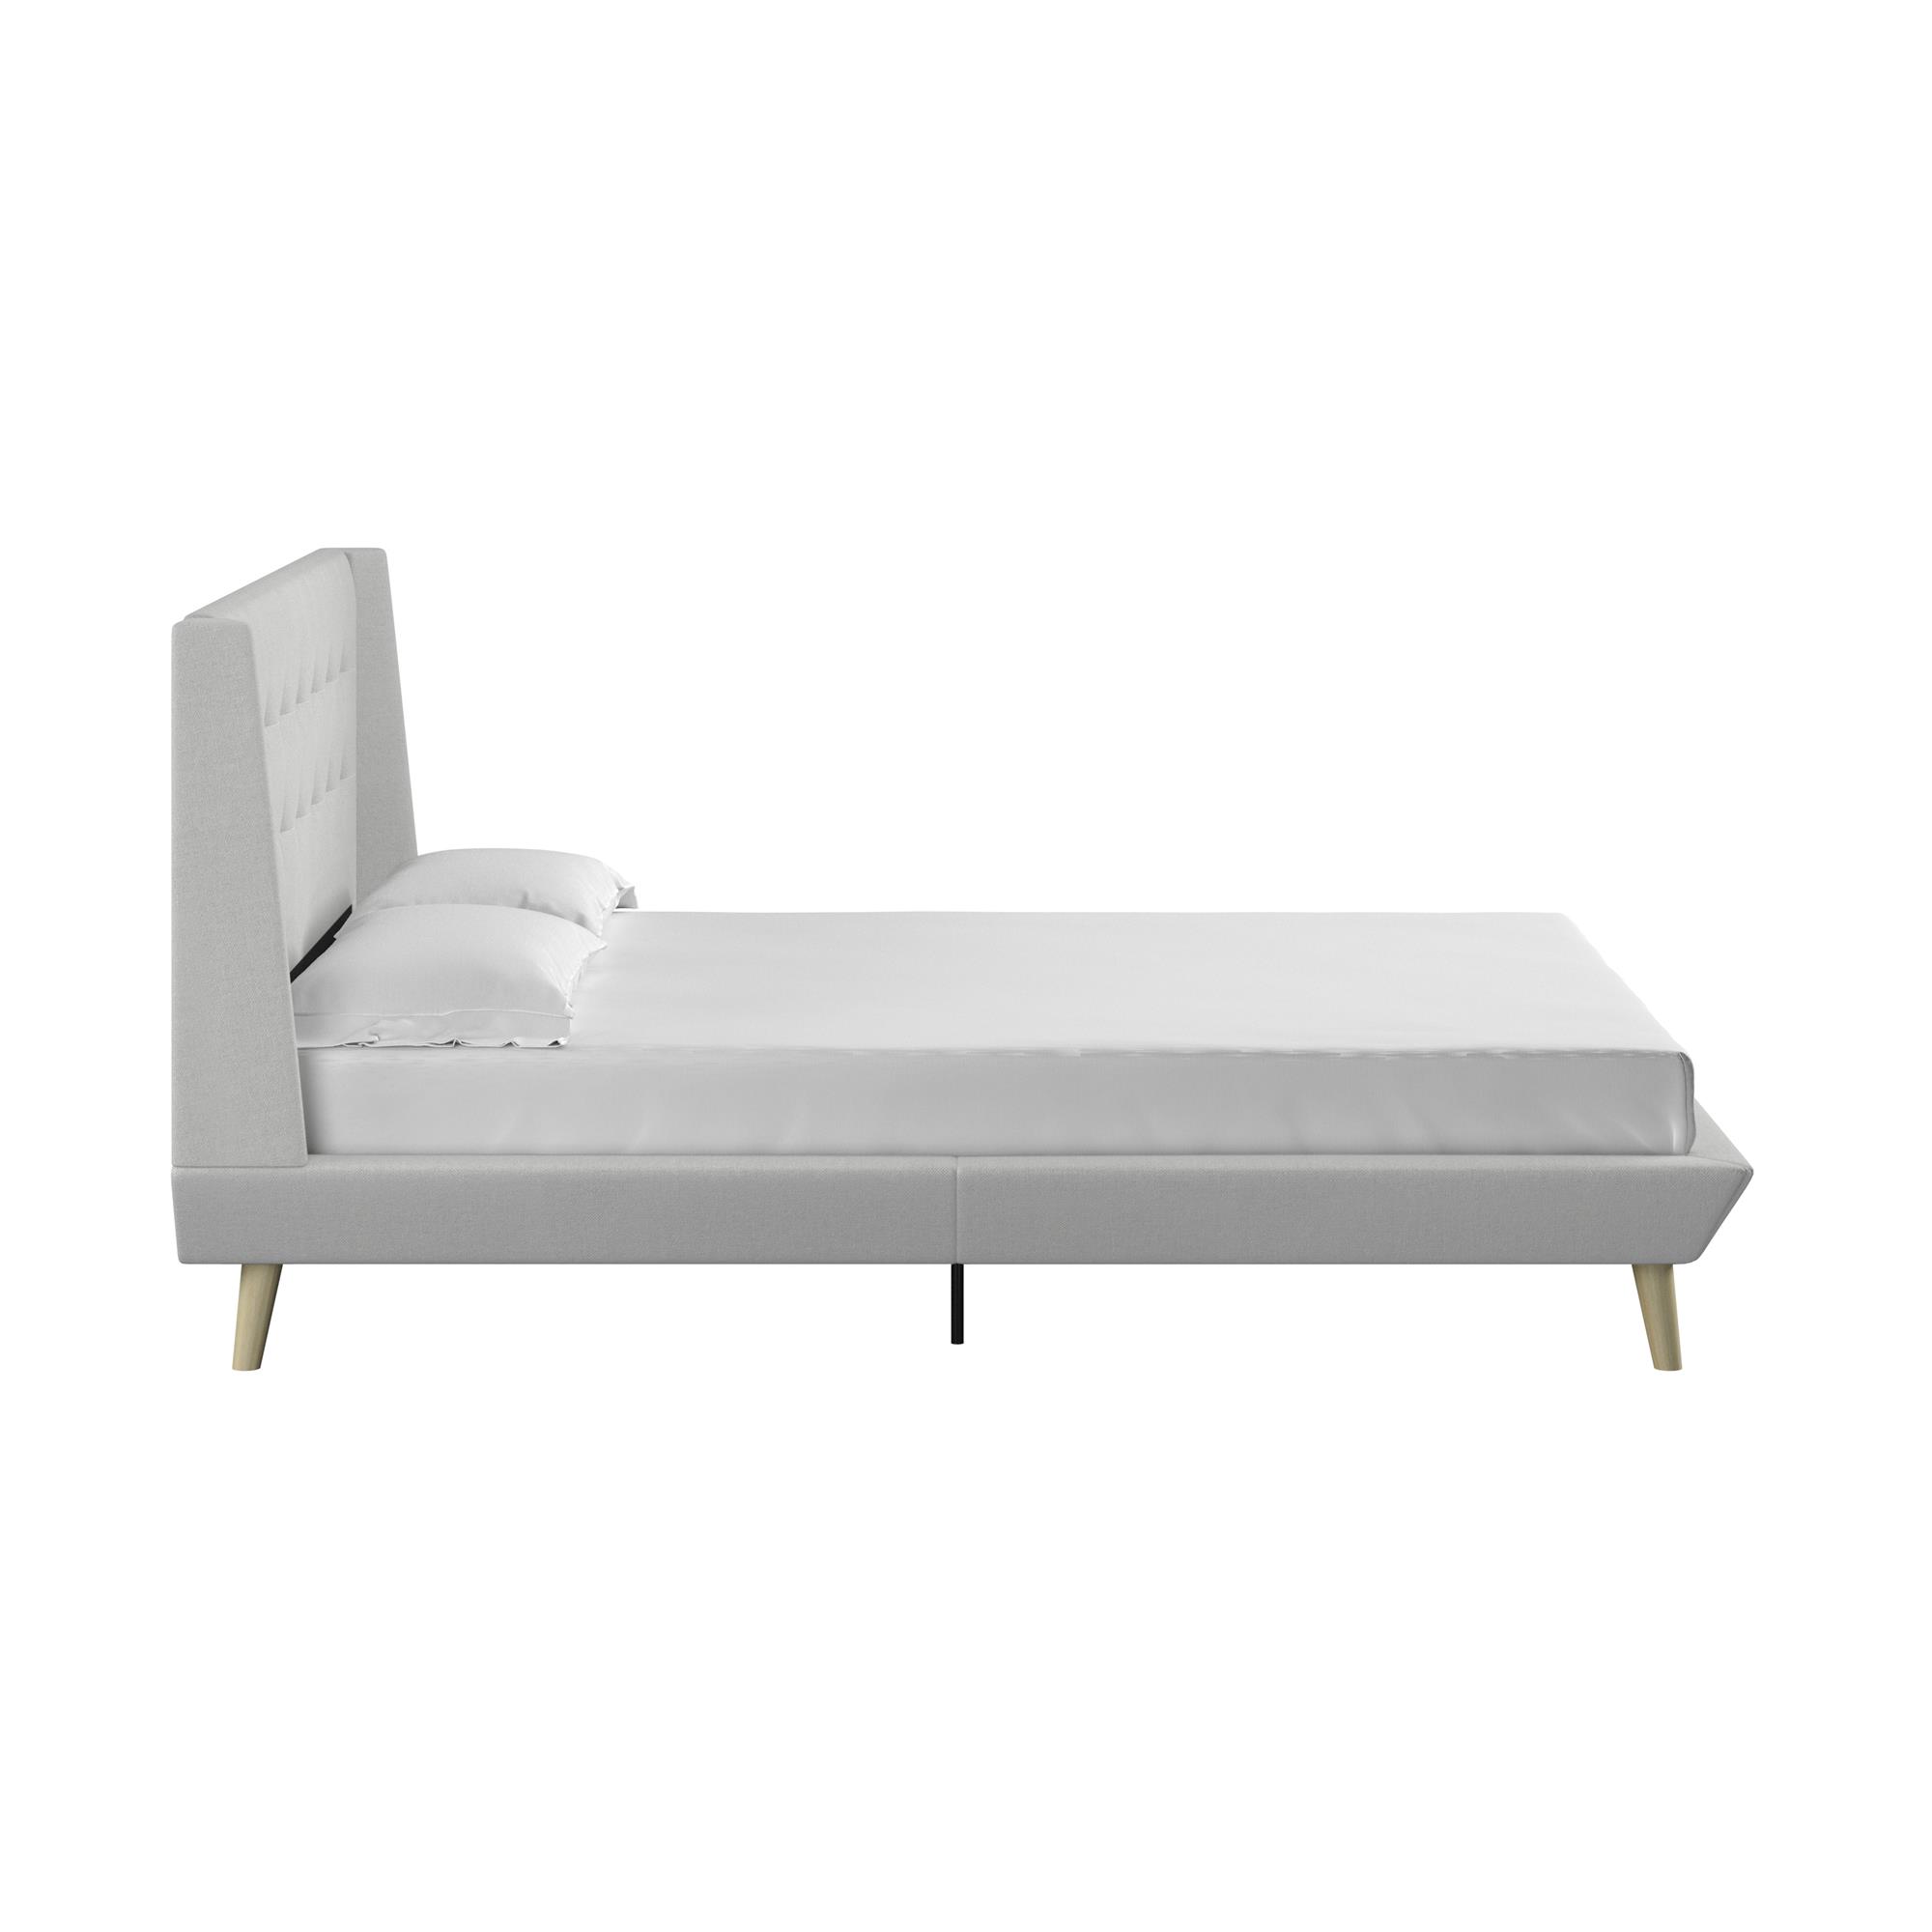 Queer Eye Farnsworth Upholstered Bed with Low Profile Platform Frame ...